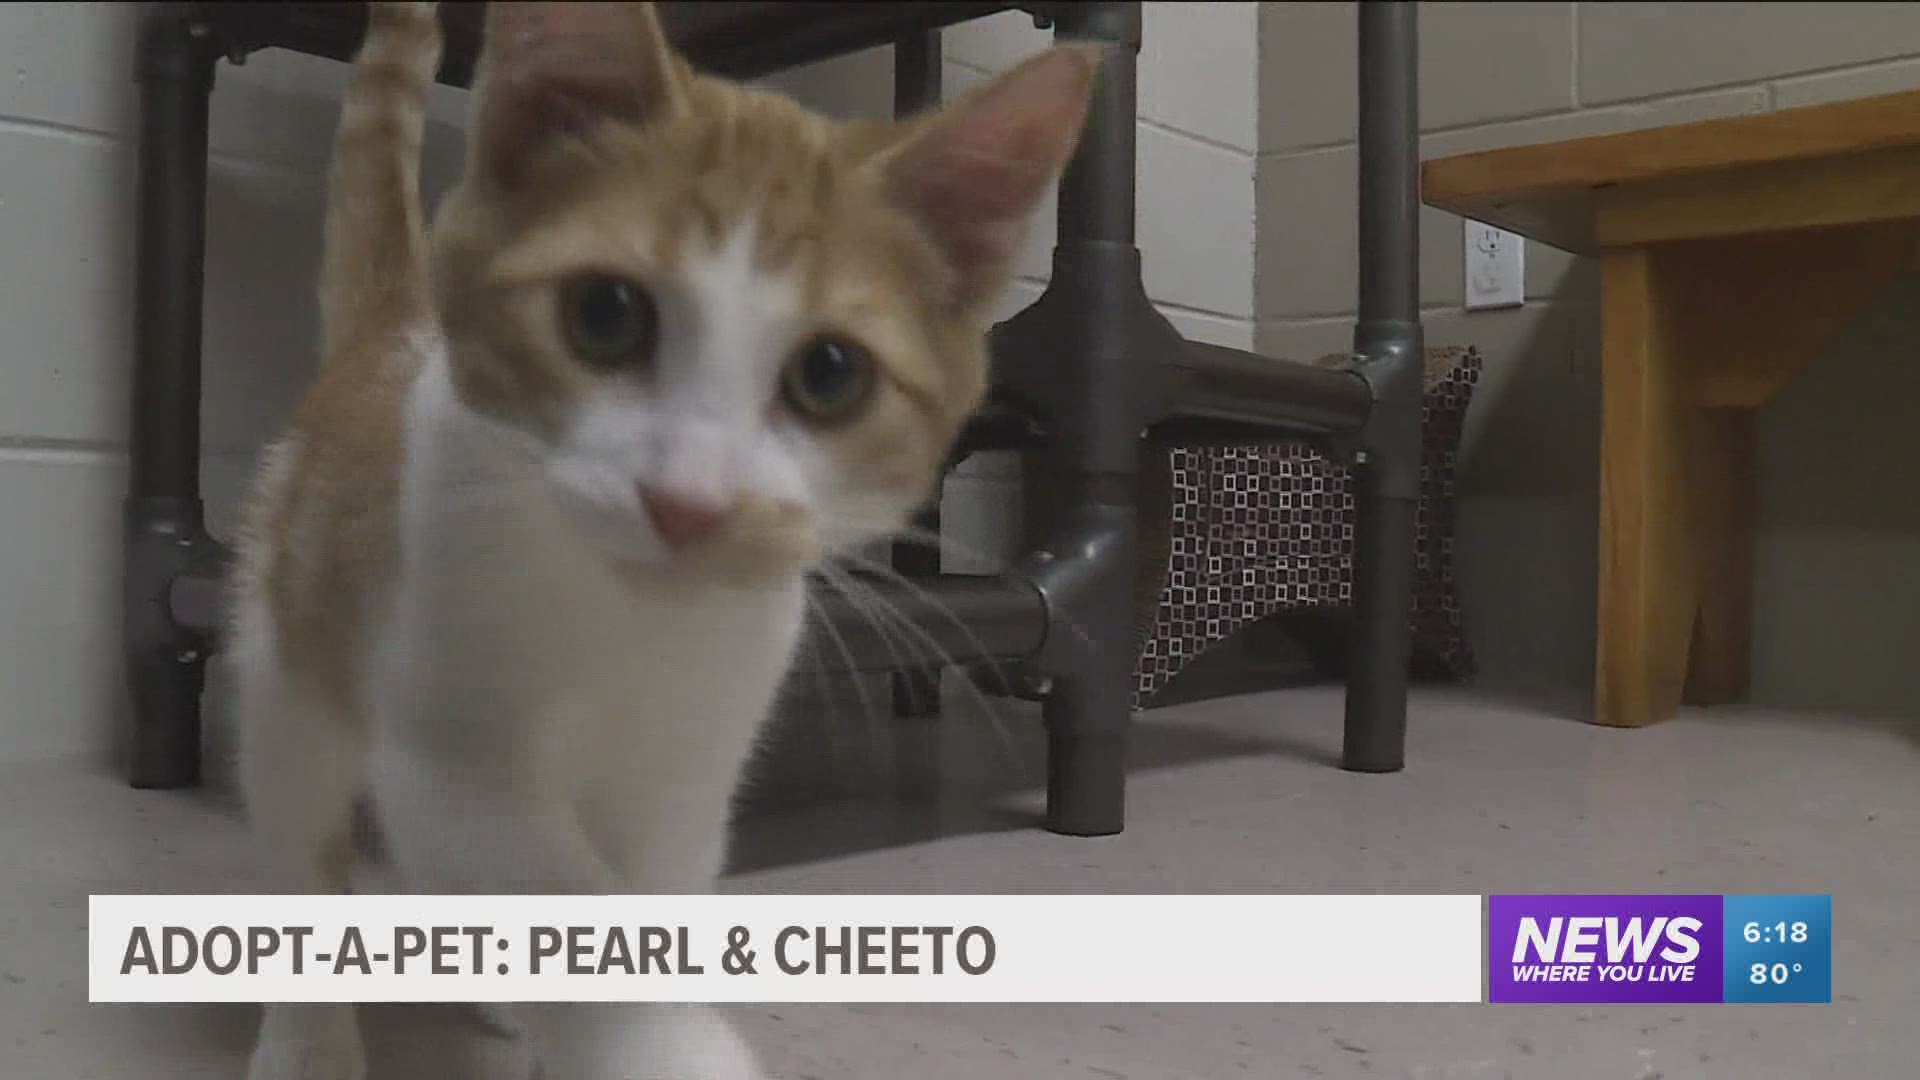 Pearl and Cheeto are available for adoption at the Washington County Animal Shelter. https://bit.ly/3ngklB8